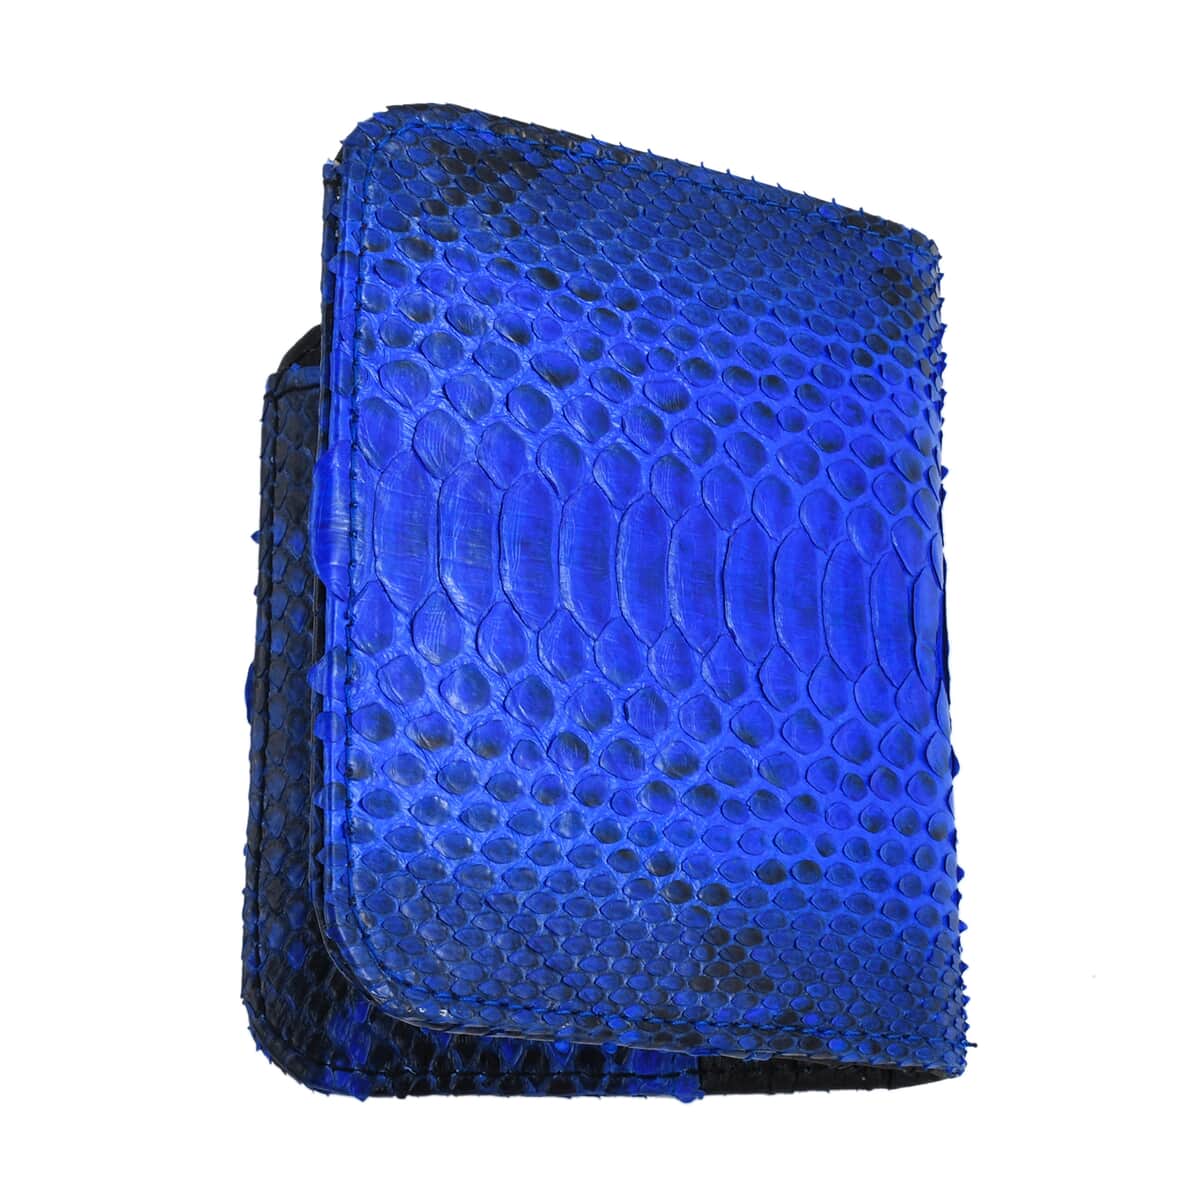 The Pelle Python Collection Handmade 100% Genuine Python Leather Blue Color Set of Crossbody Bag (11"x6.5"x2.5") with Wallet (4.3"x3.5"x1.5") image number 5